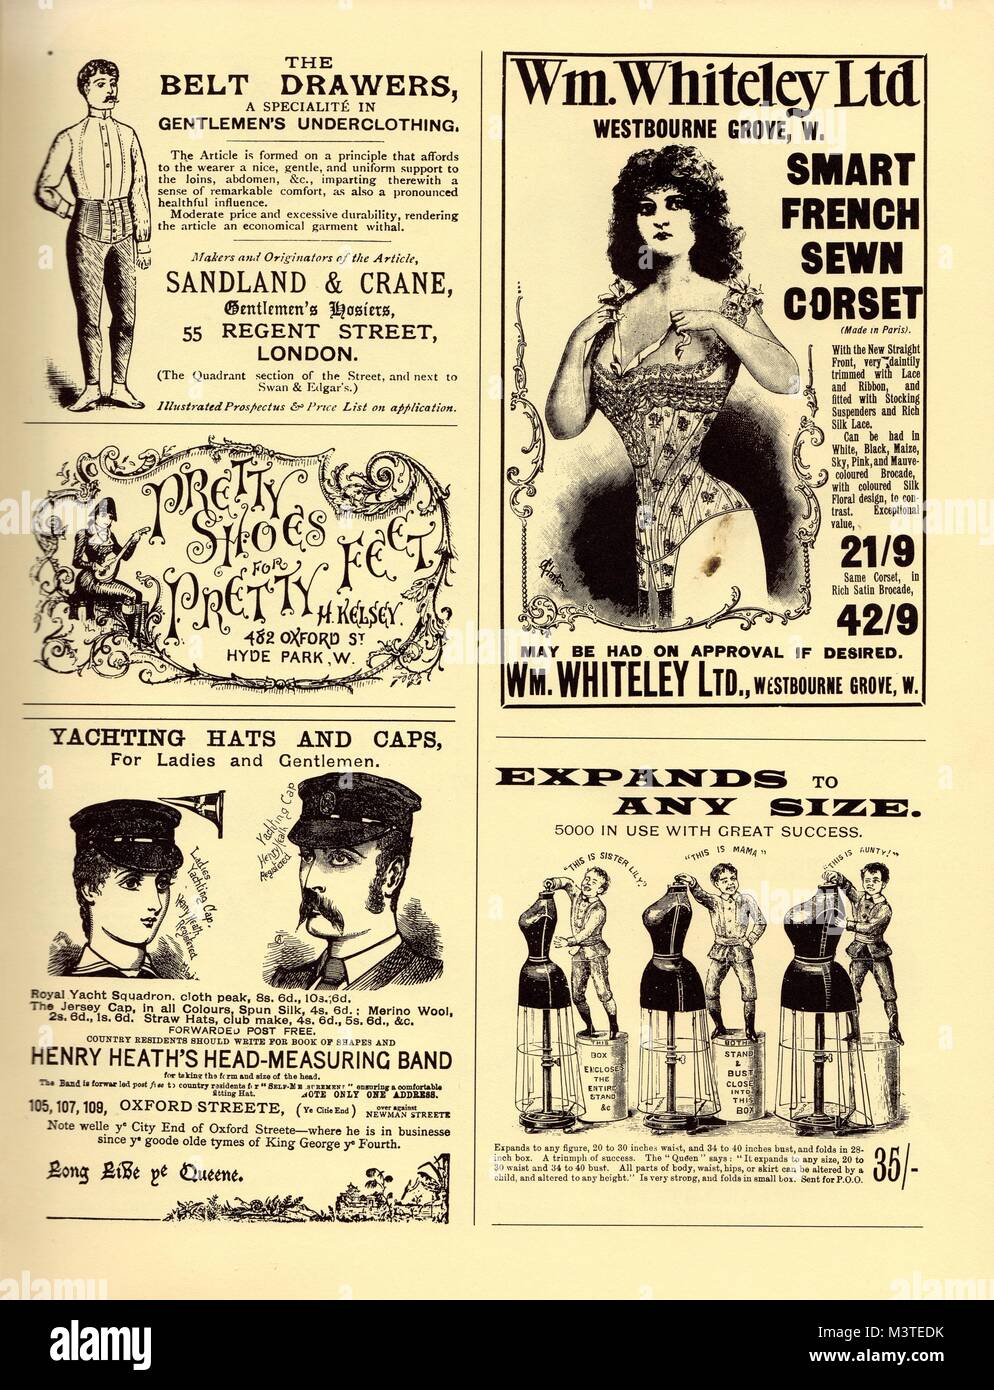 https://c8.alamy.com/comp/M3TEDK/victorian-and-edwardian-advertising-posters-showing-underwear-and-M3TEDK.jpg